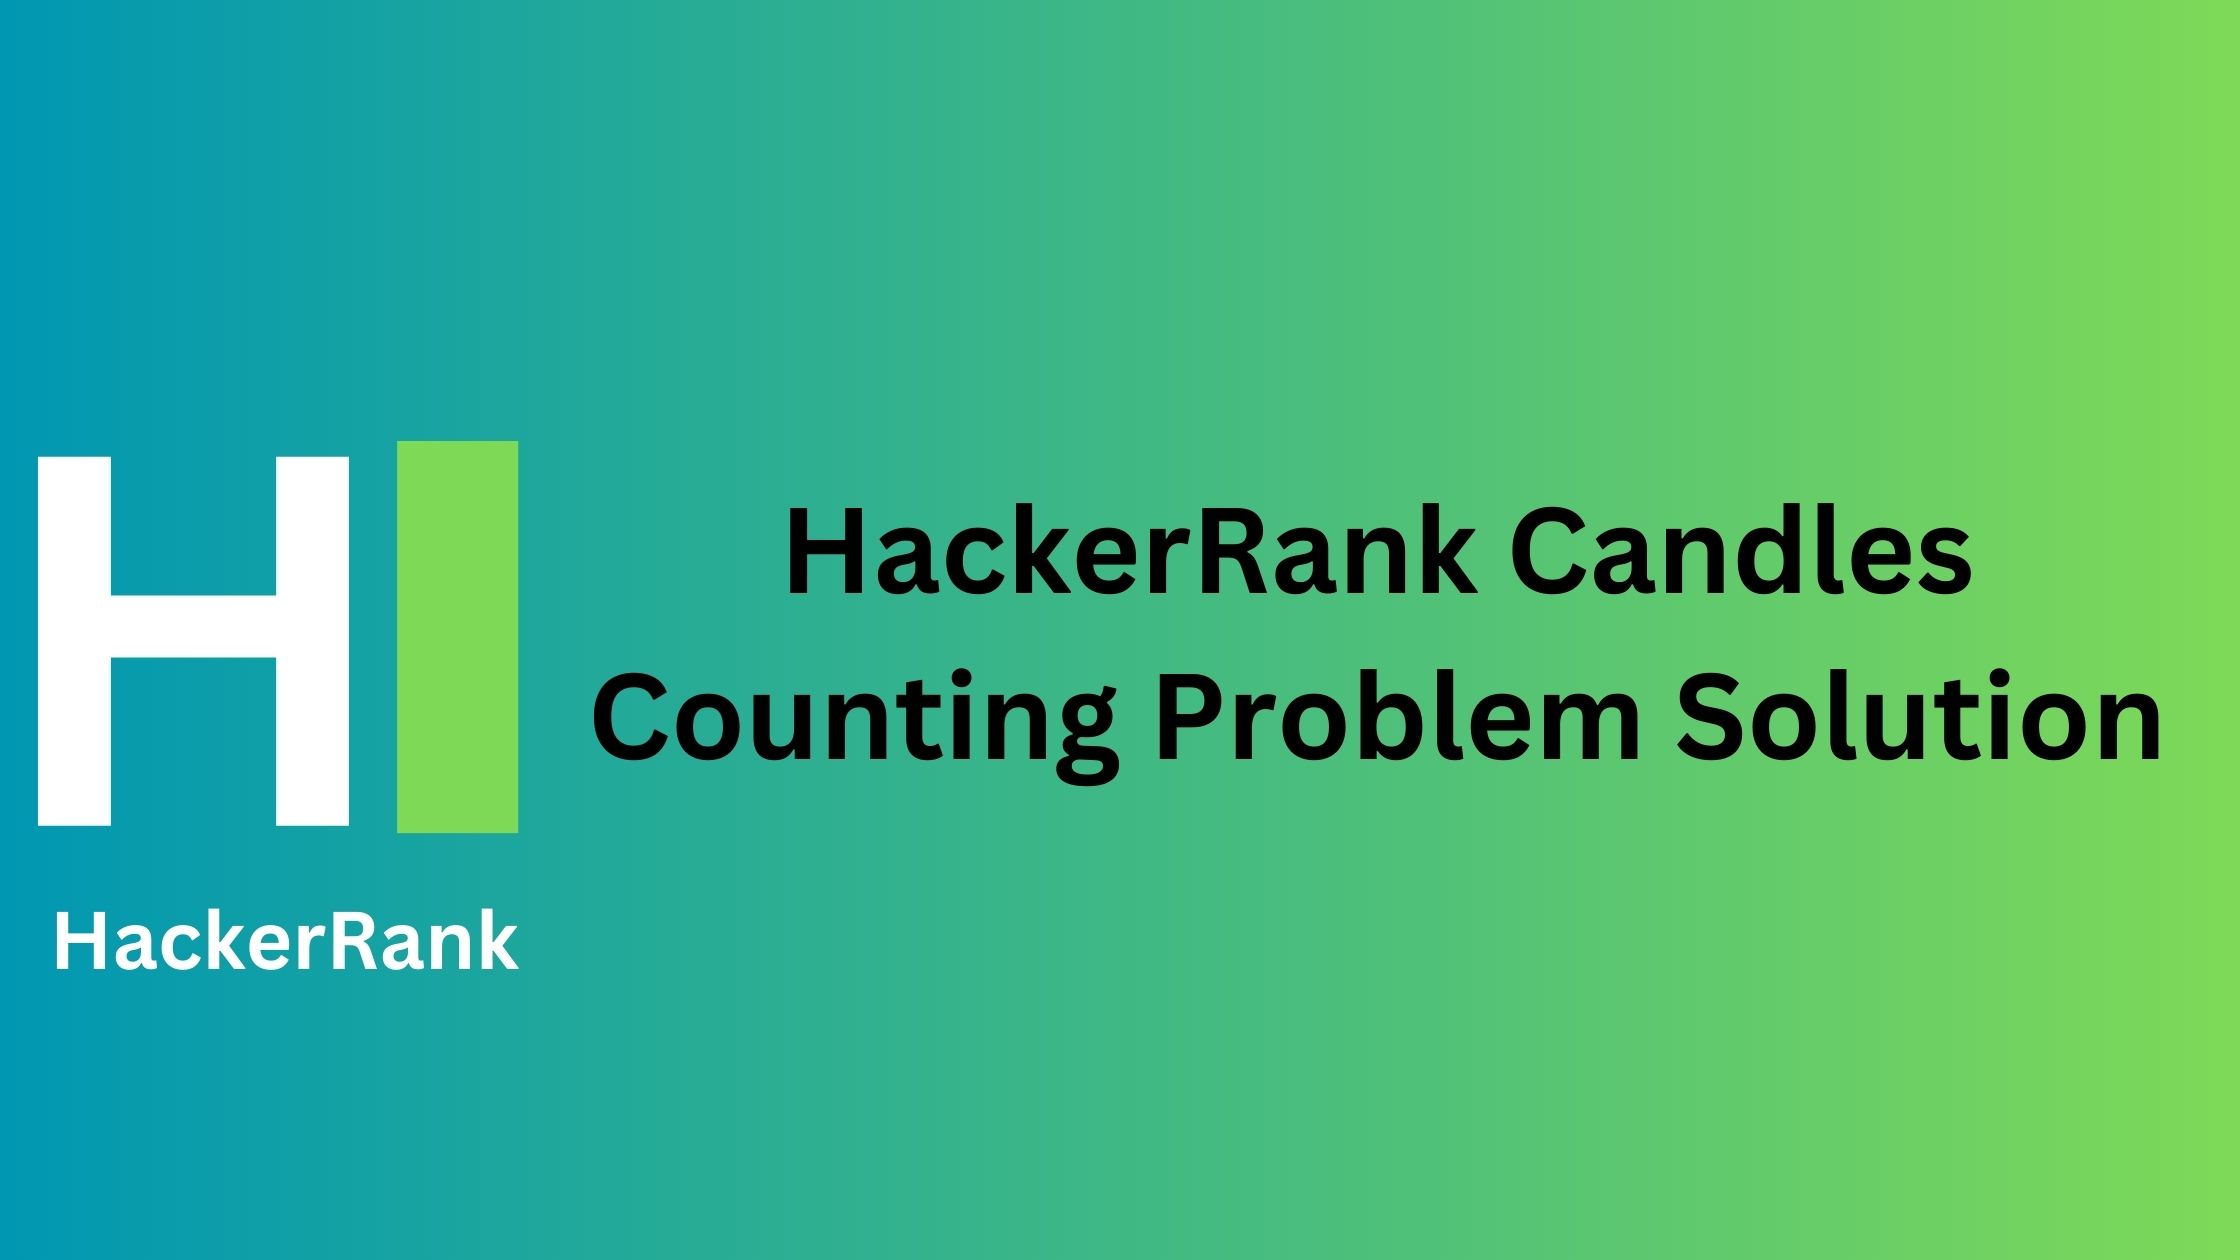 HackerRank Candles Counting Problem Solution